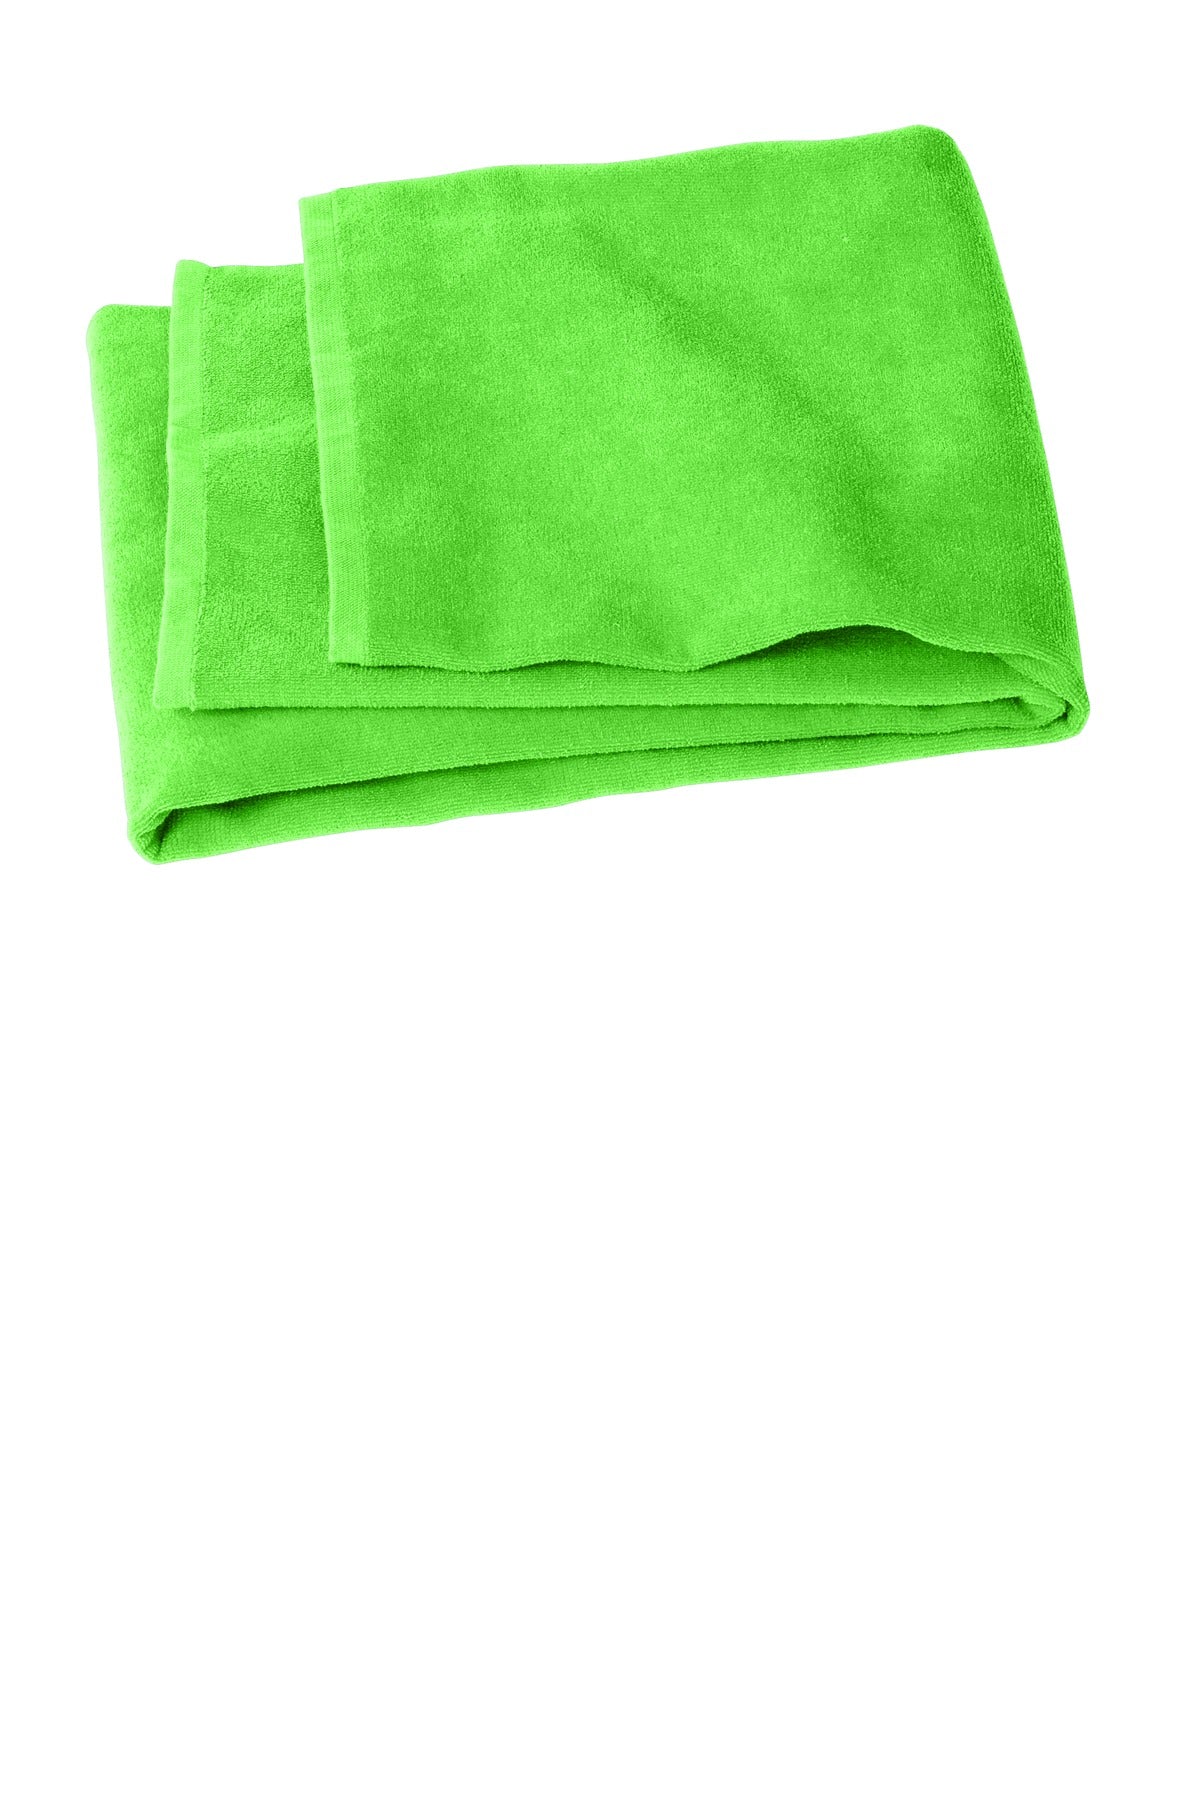 Accessories Bright Lime OSFA Port Authority